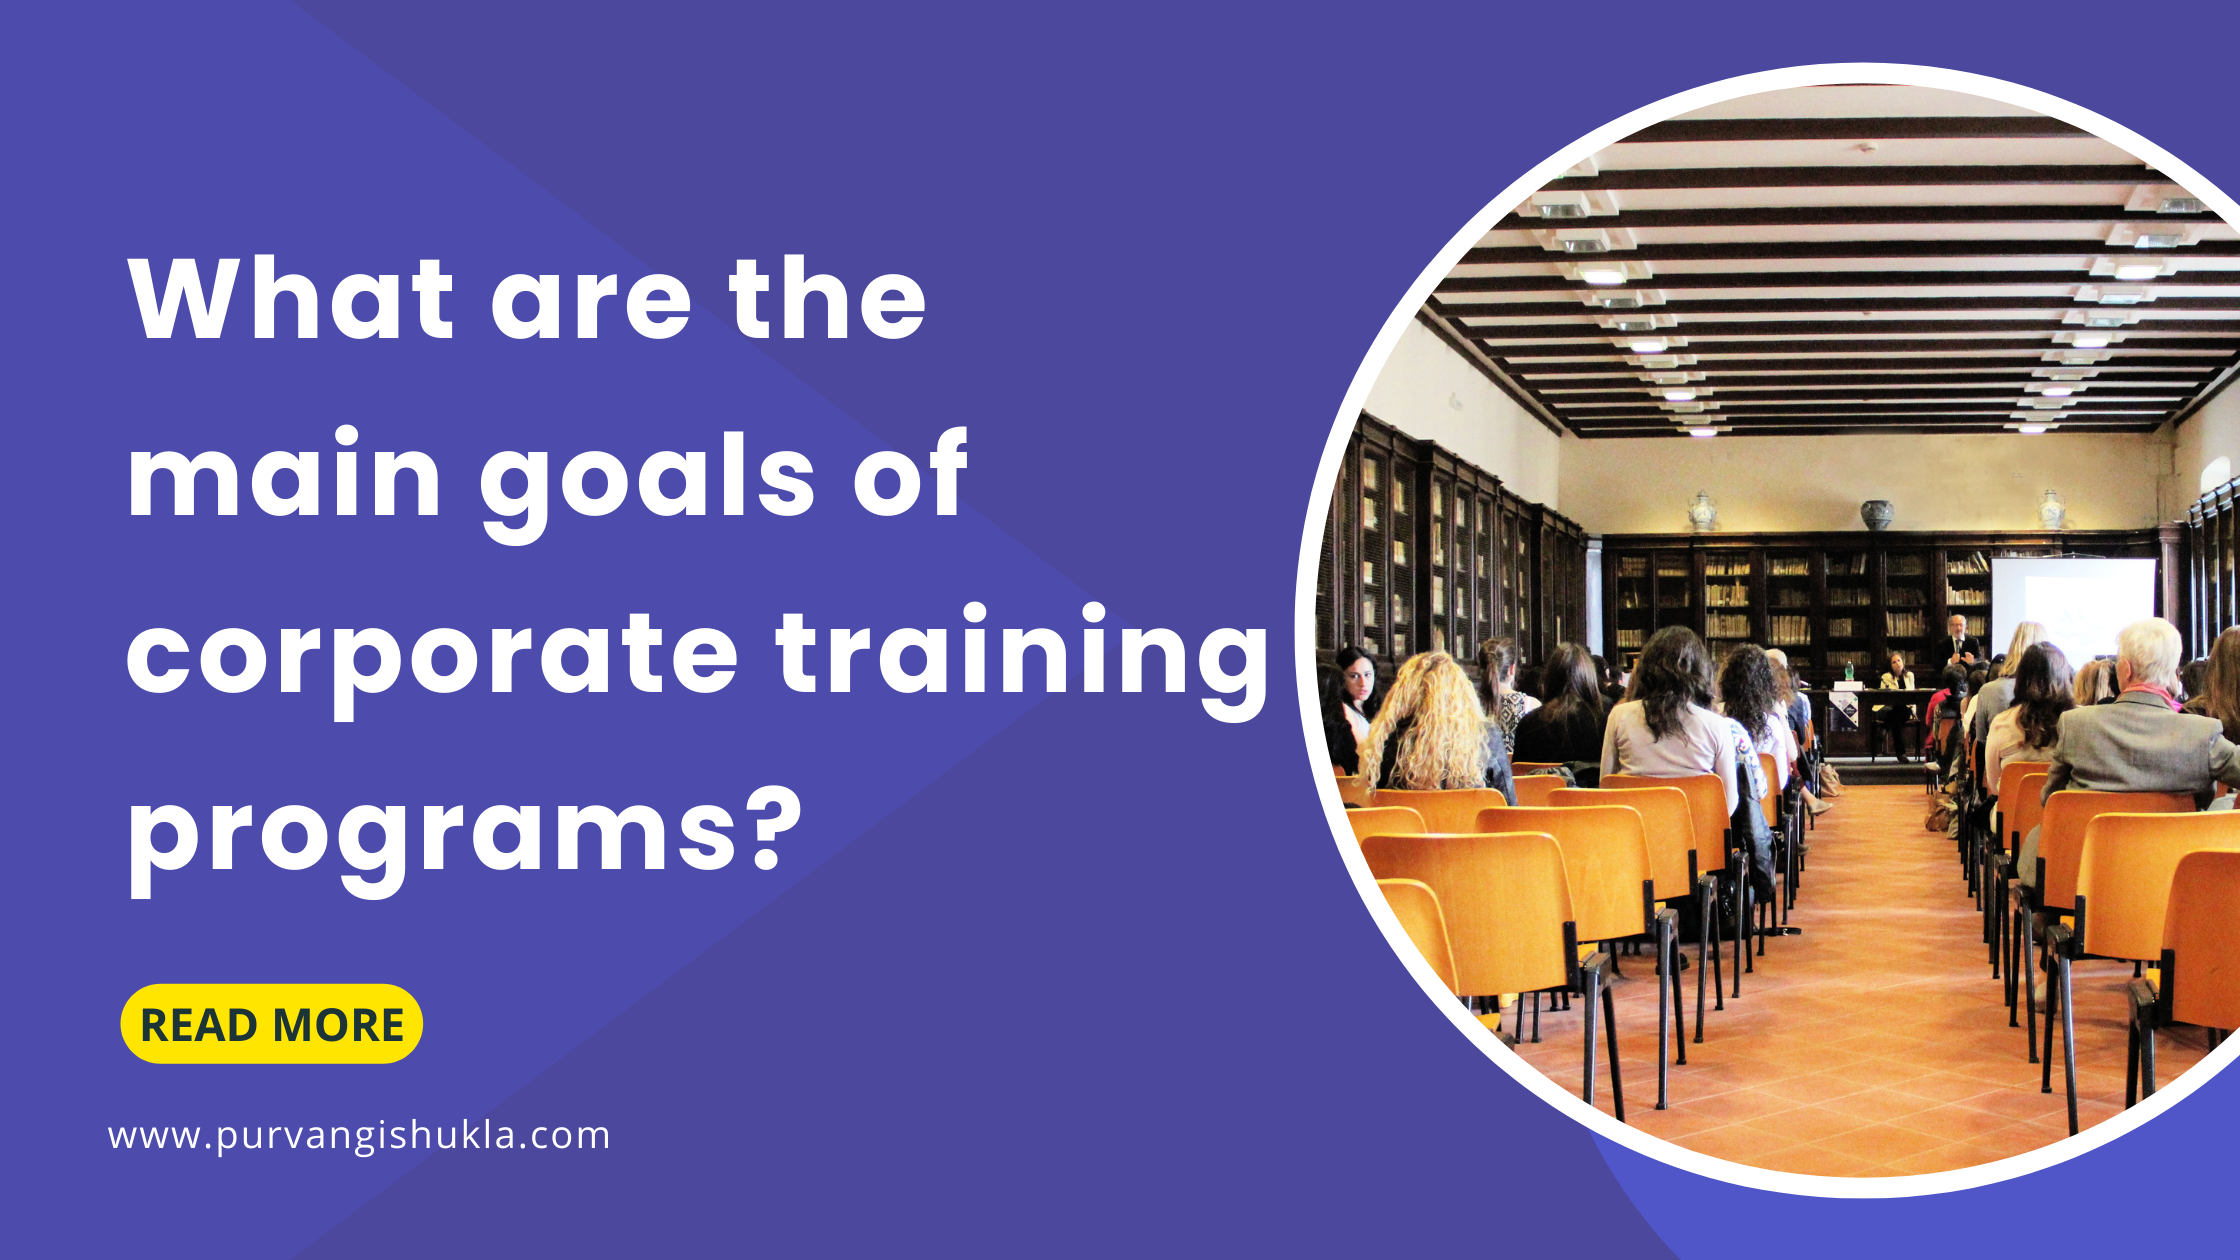 What are the main goals of corporate training programs